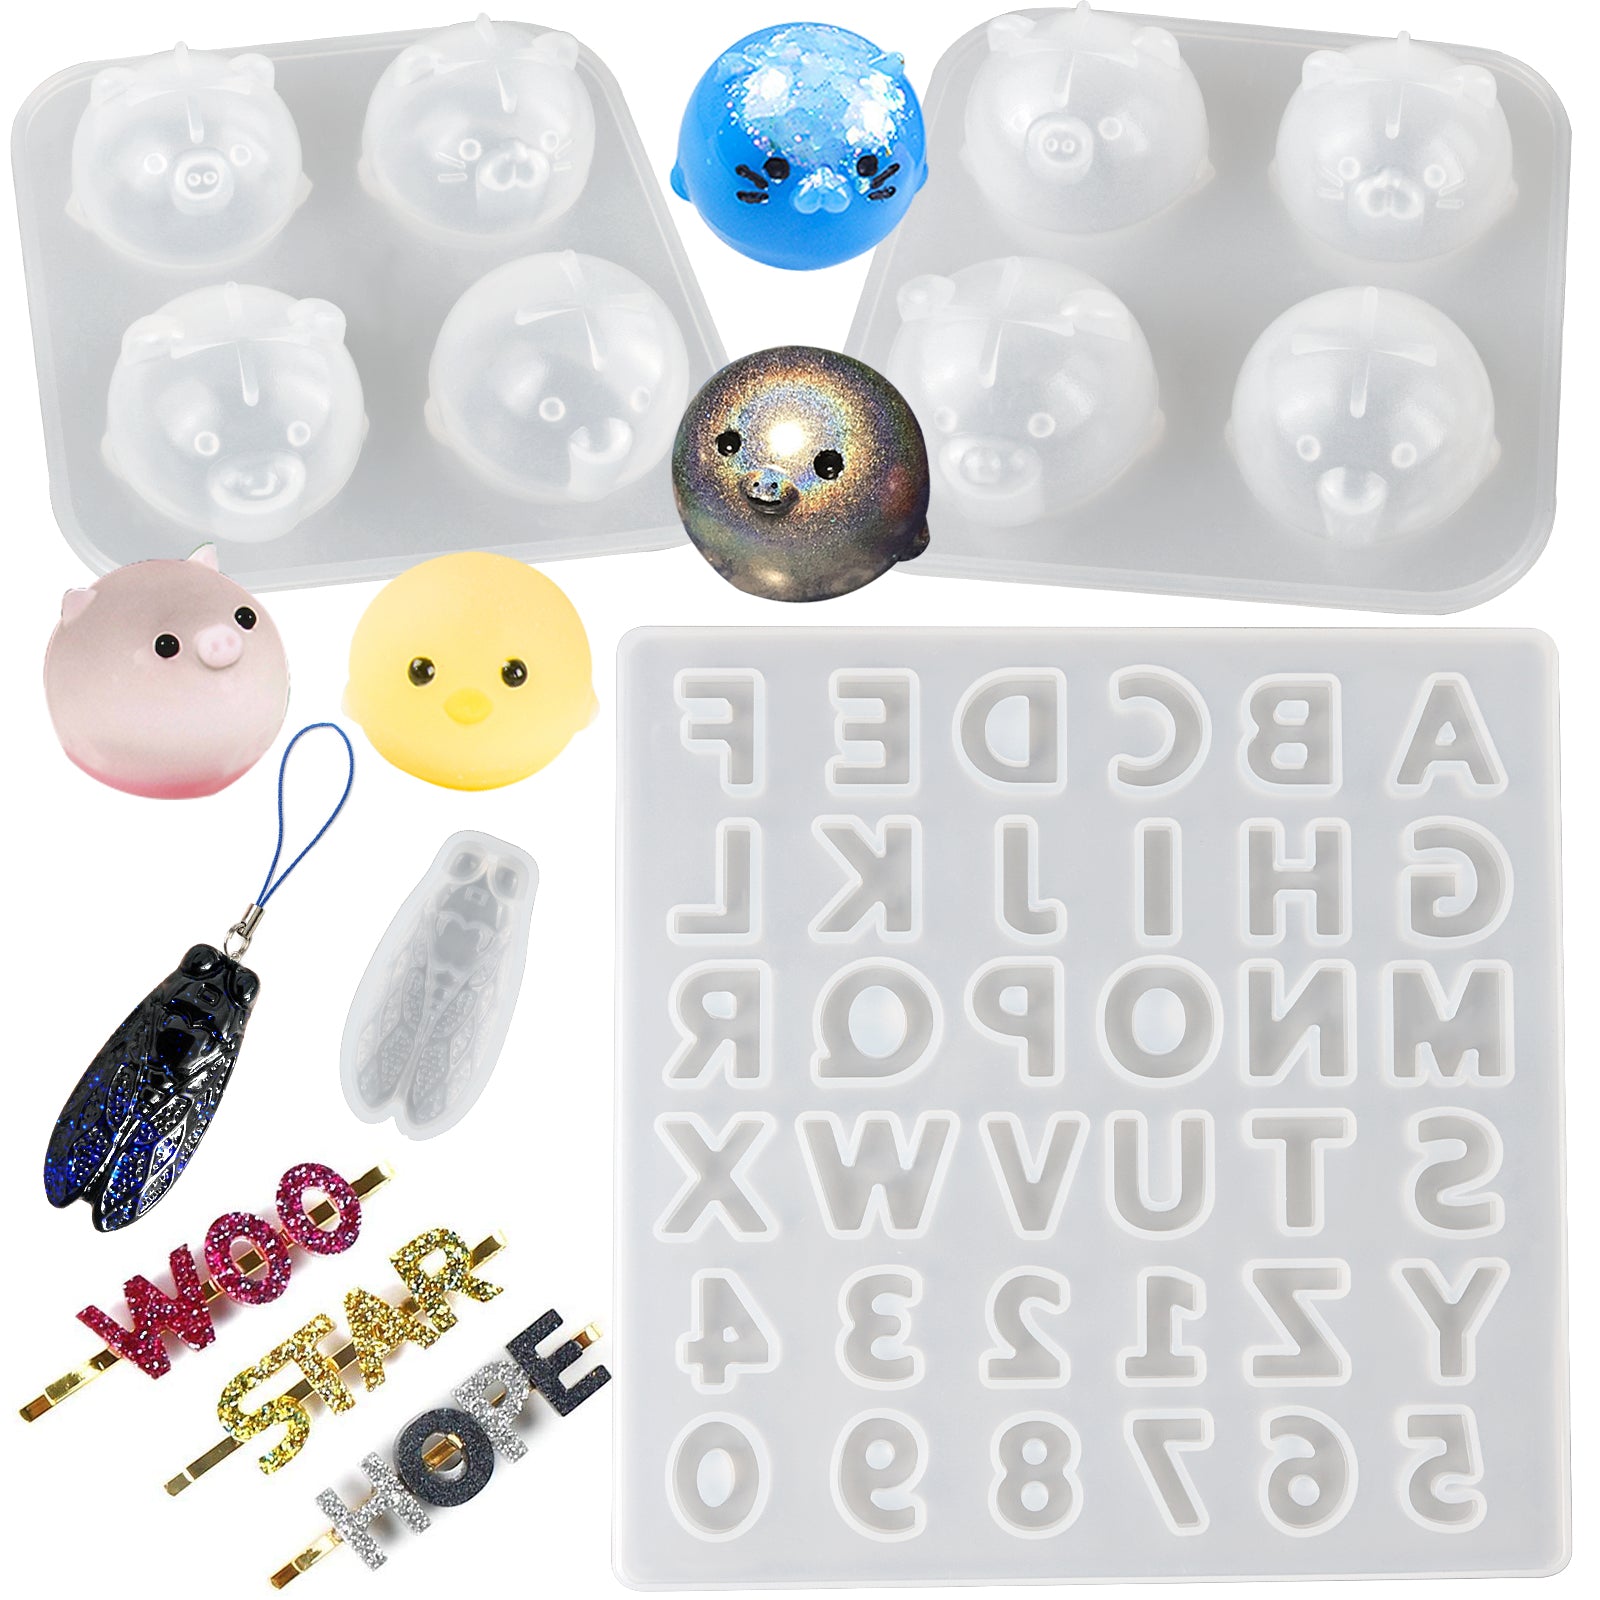 Funshowcase Number Alphabet Silicone Resin Molds Set 2-Count Large|Small